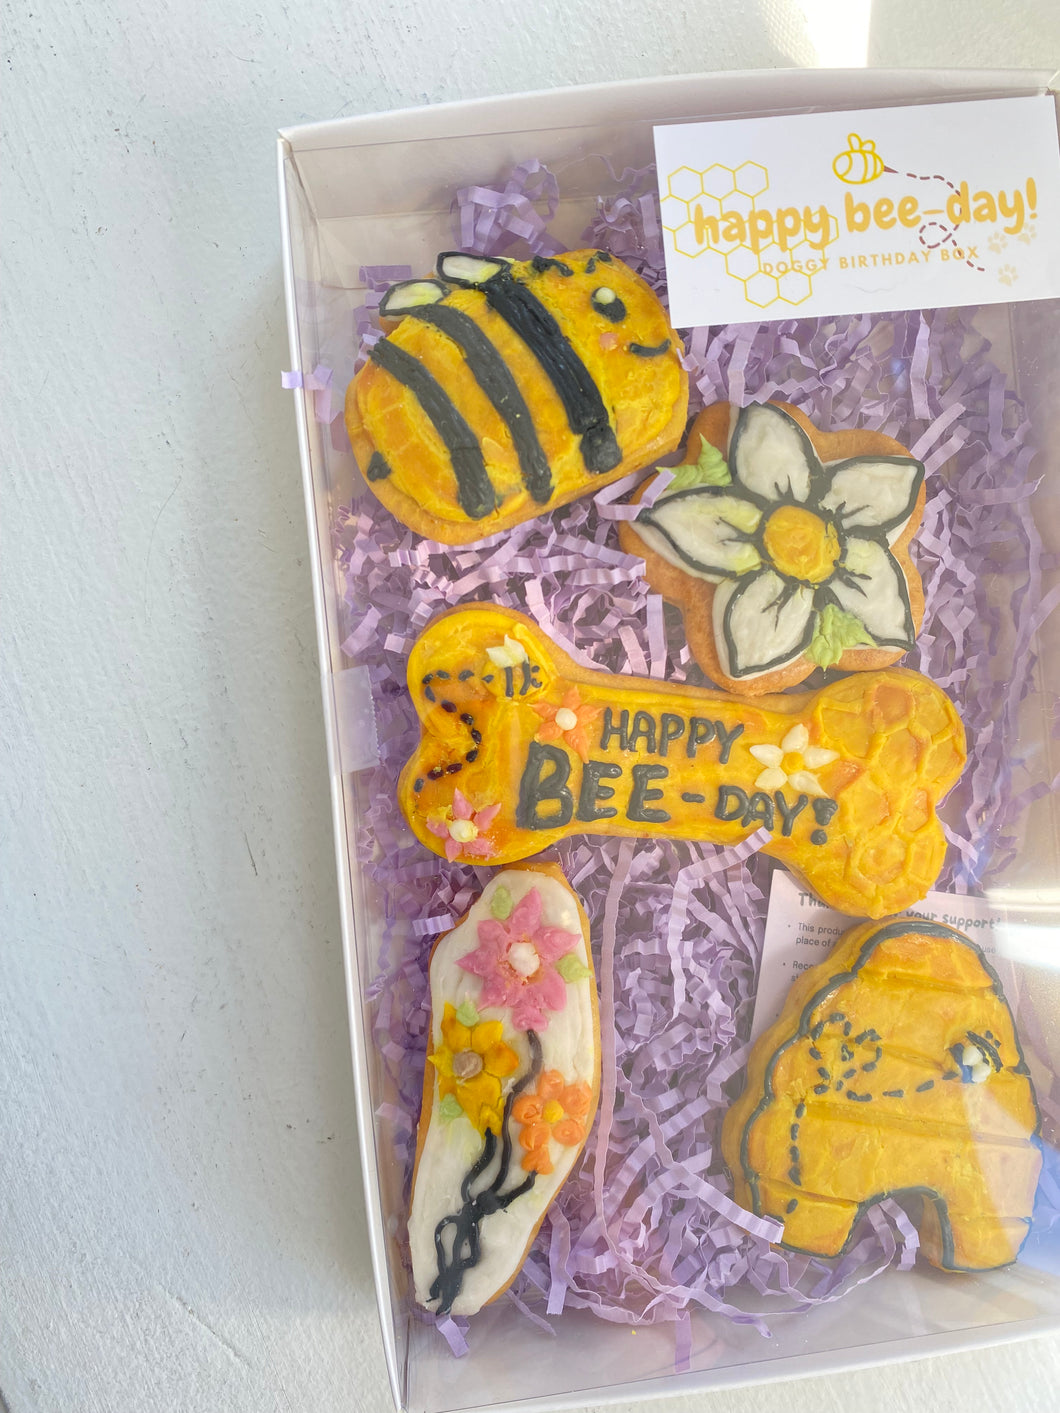 Happy BEE-Day: Themed Birthday Box Collection